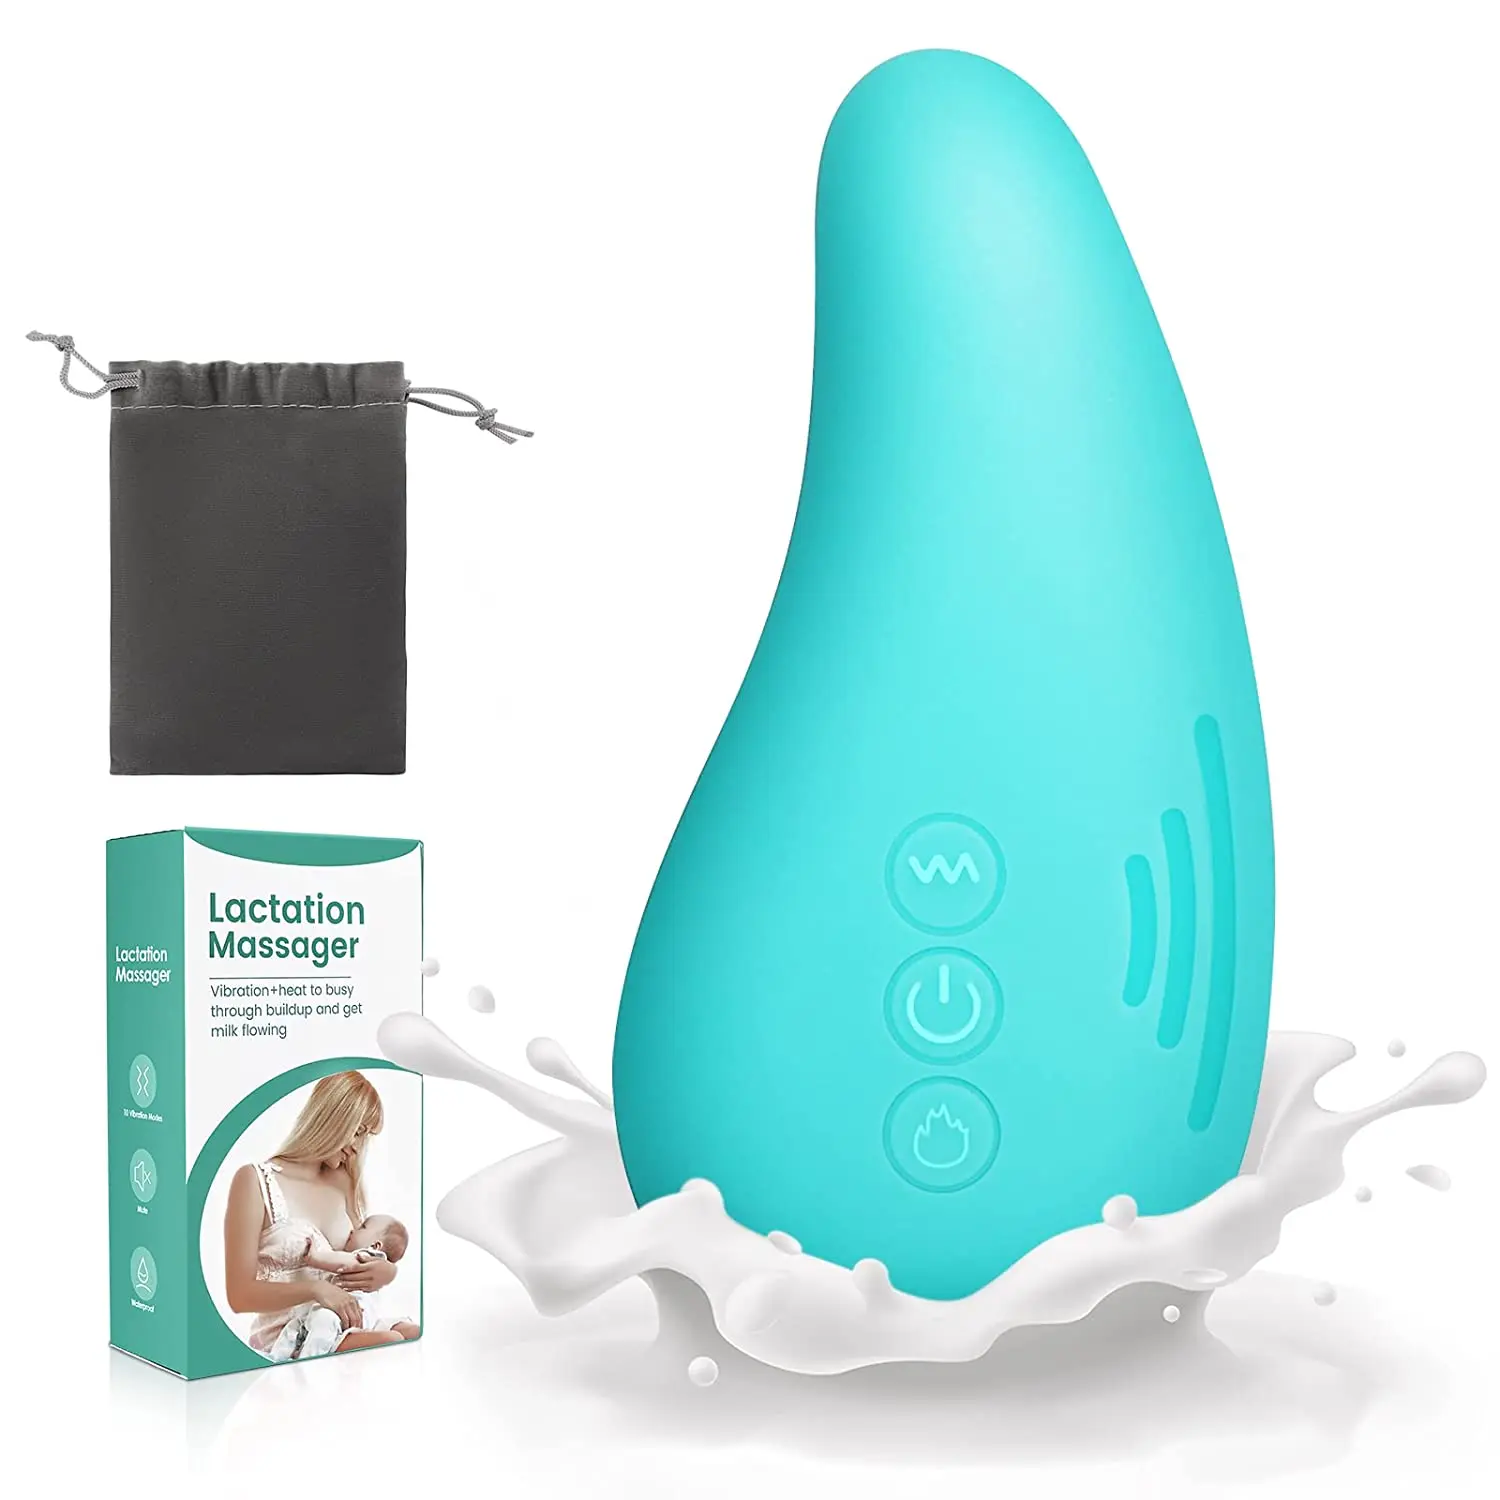 

Hot Selling Low-Priced Breast Care Warming Lactation Massager Essential Massage Machine for Breastfeeding